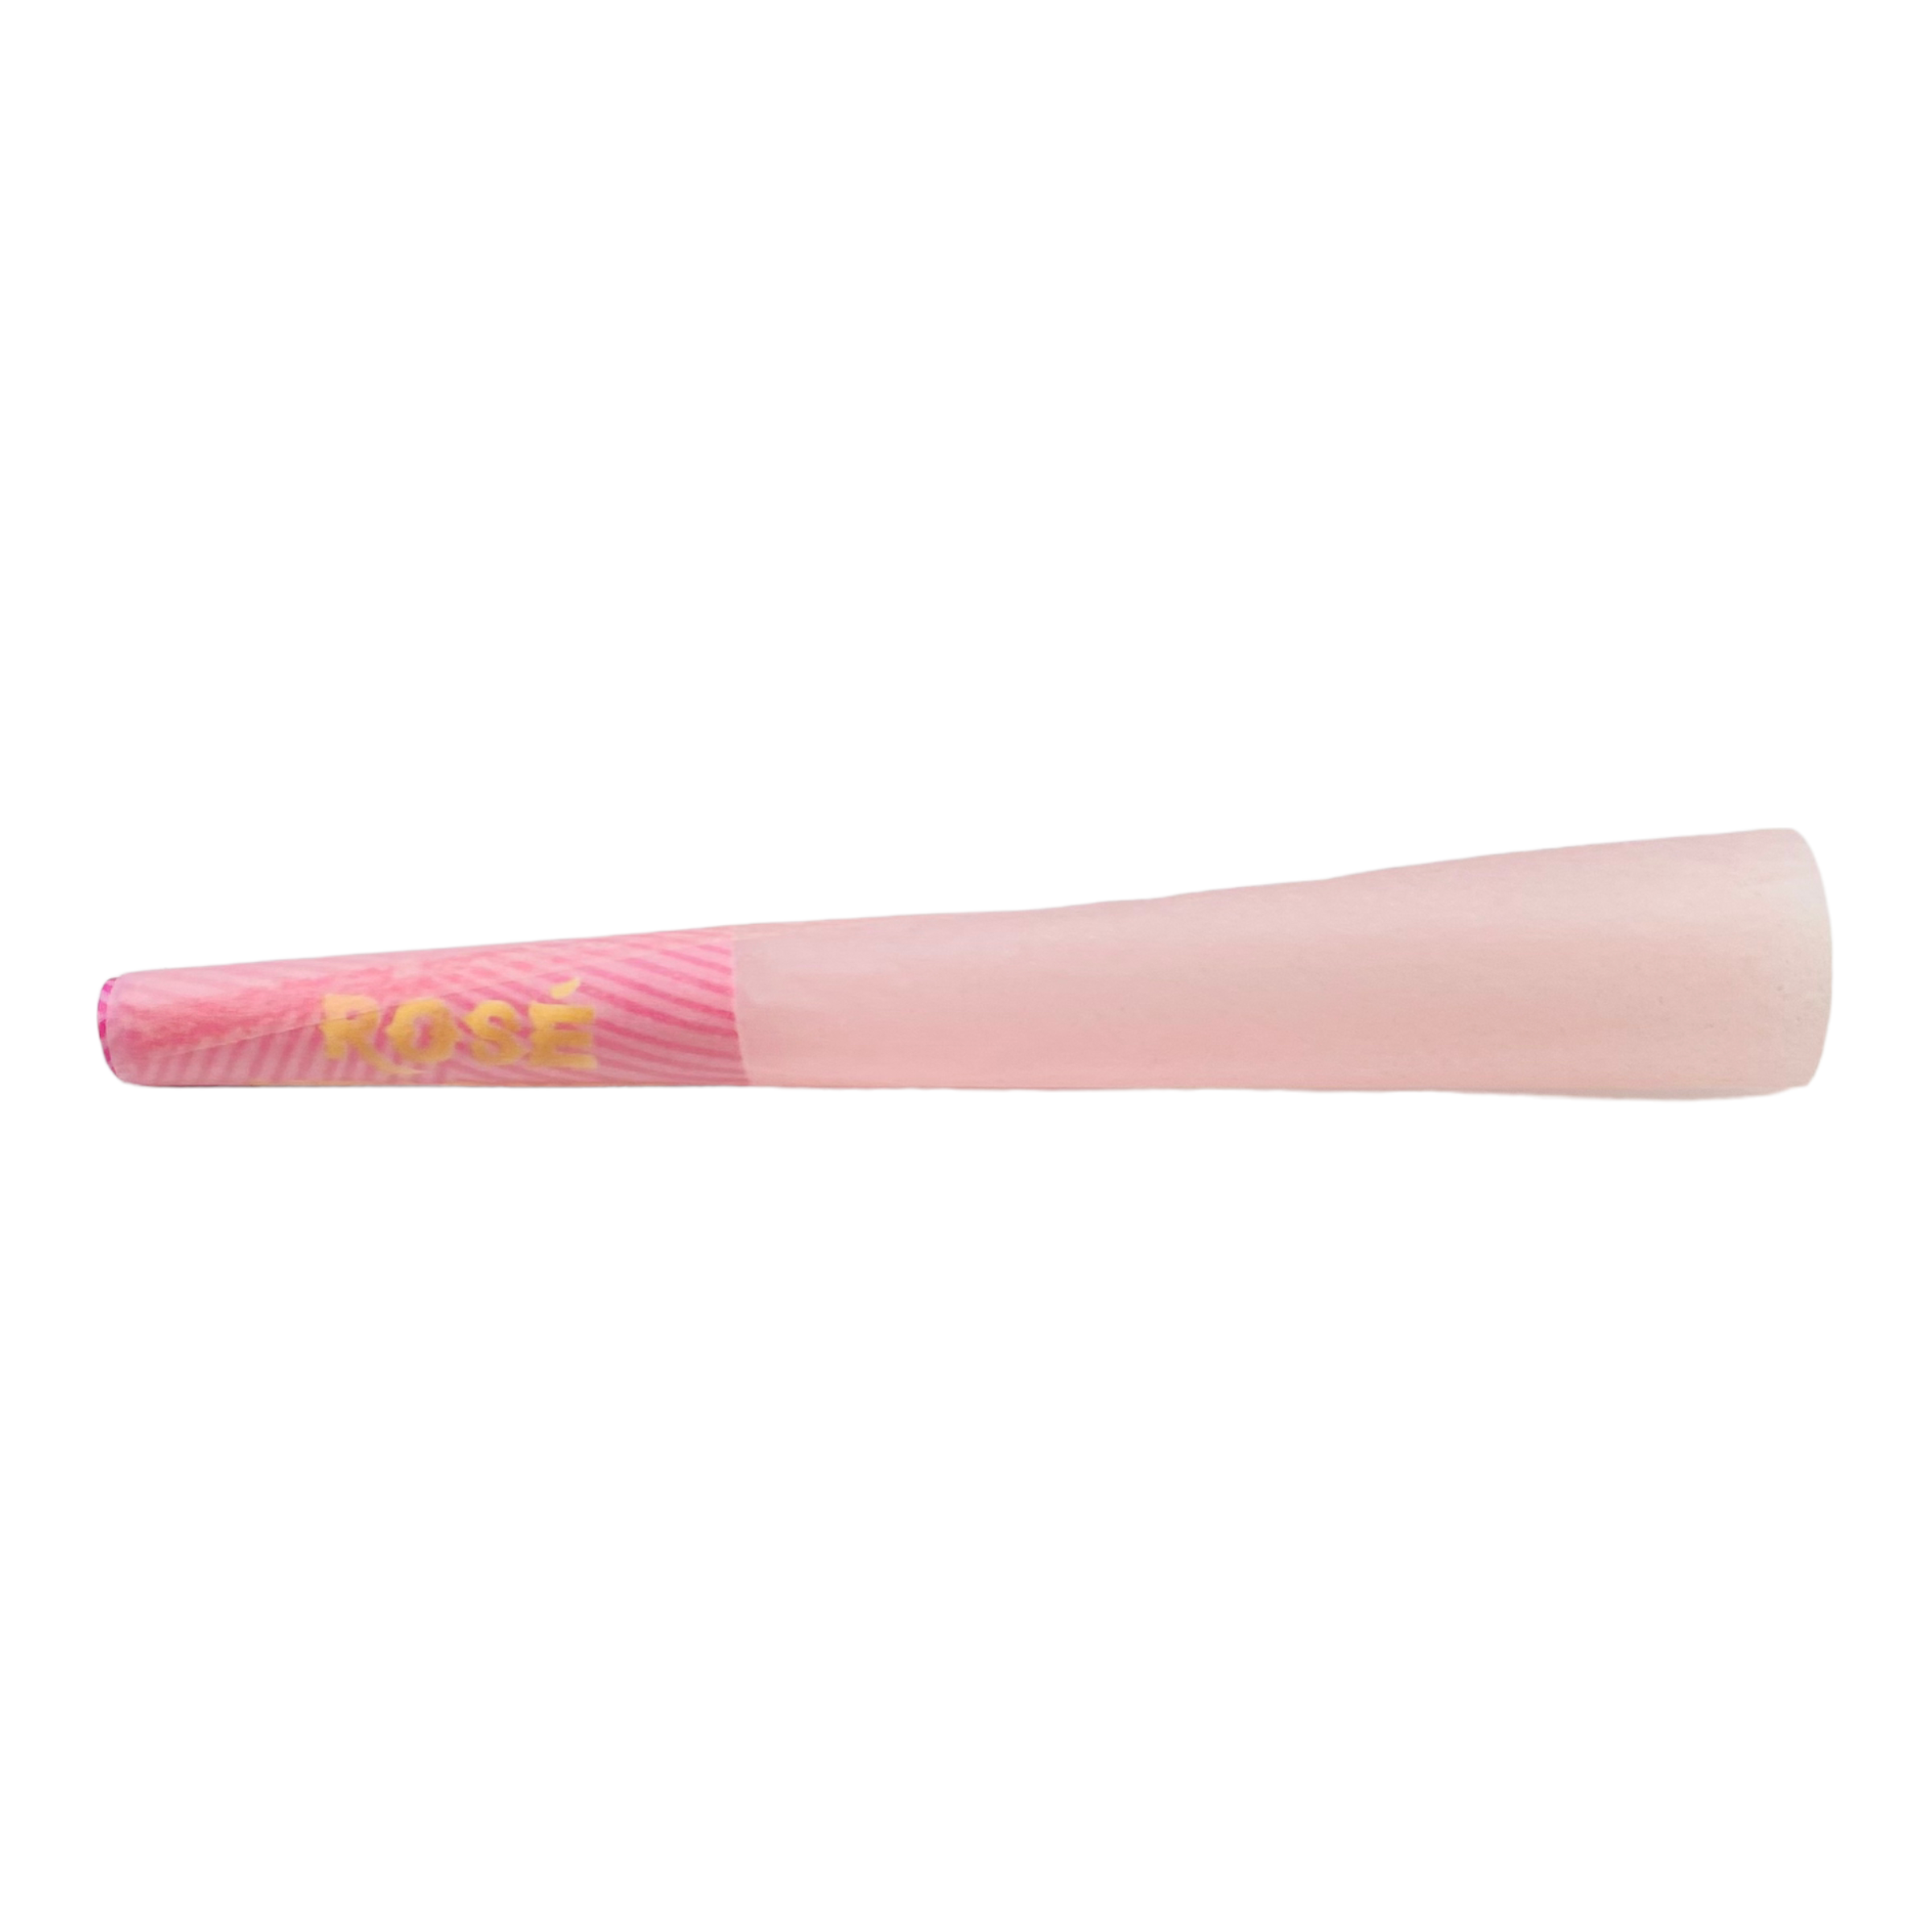 Rose Heights - Pink Pre Rolled Cones - 1 1/4 Size - 6ct - 2 BOXES